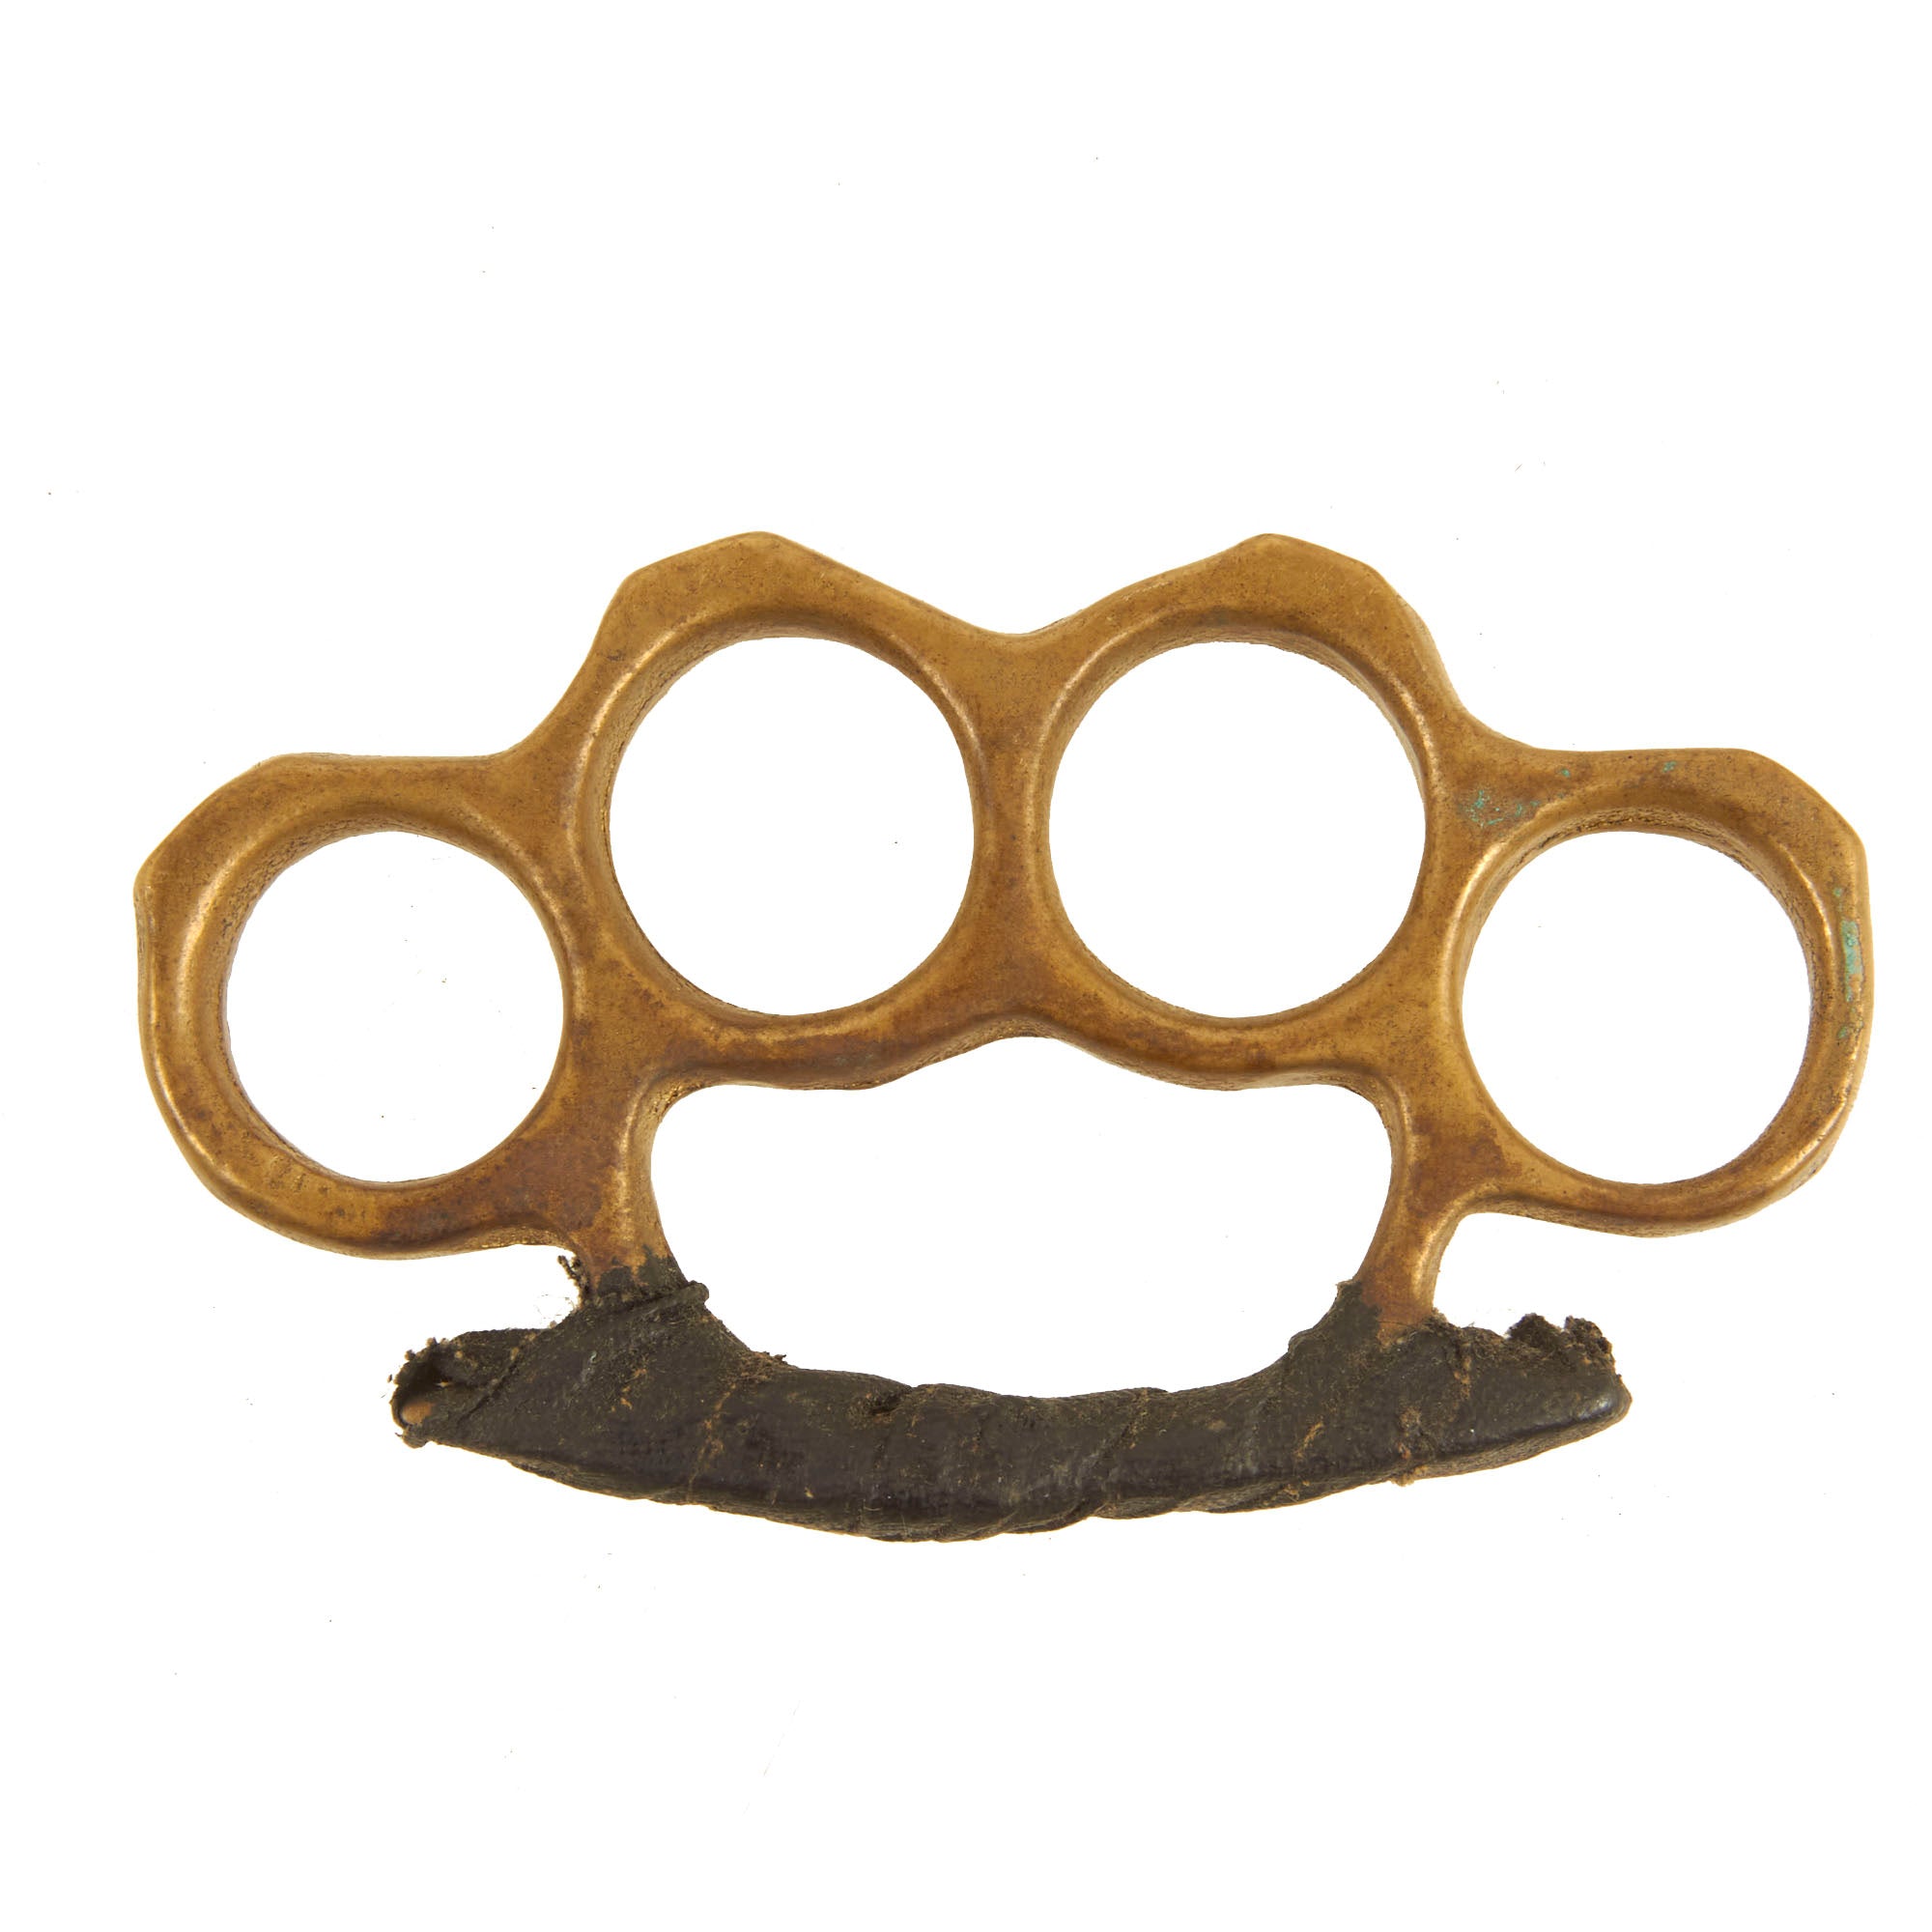 Machined Brass Knuckle Duster - Textured Brass Knuckles - Unique Knuckle  Dusters